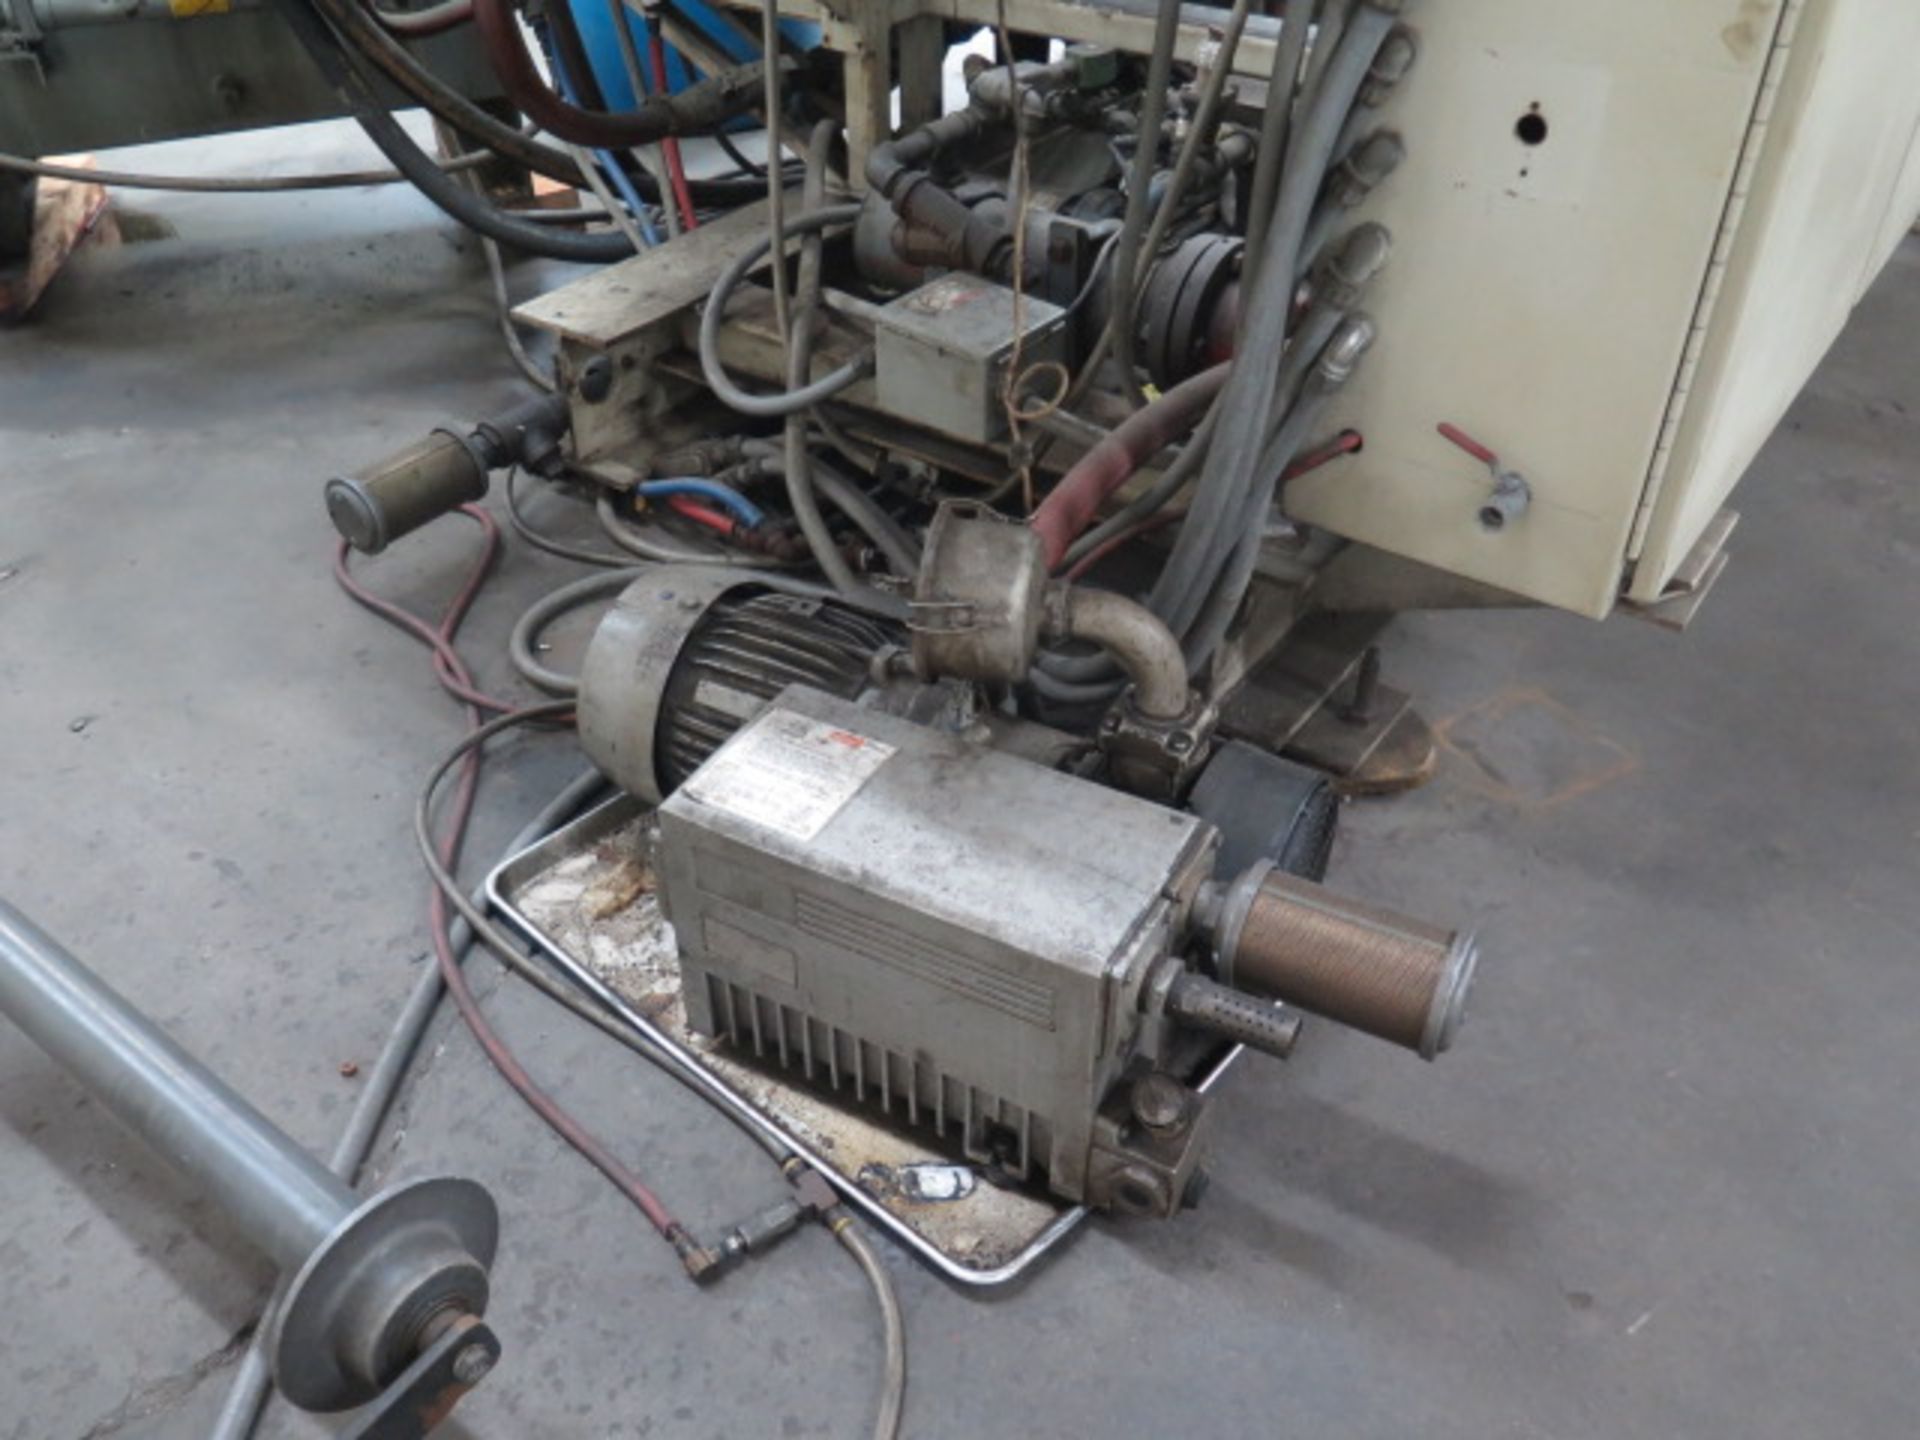 Sencorp Systems mdl. 2200 Thermoforming s/n 92214295 w/ Sencorp Controls, Film Preheater, SOLD AS IS - Image 12 of 28